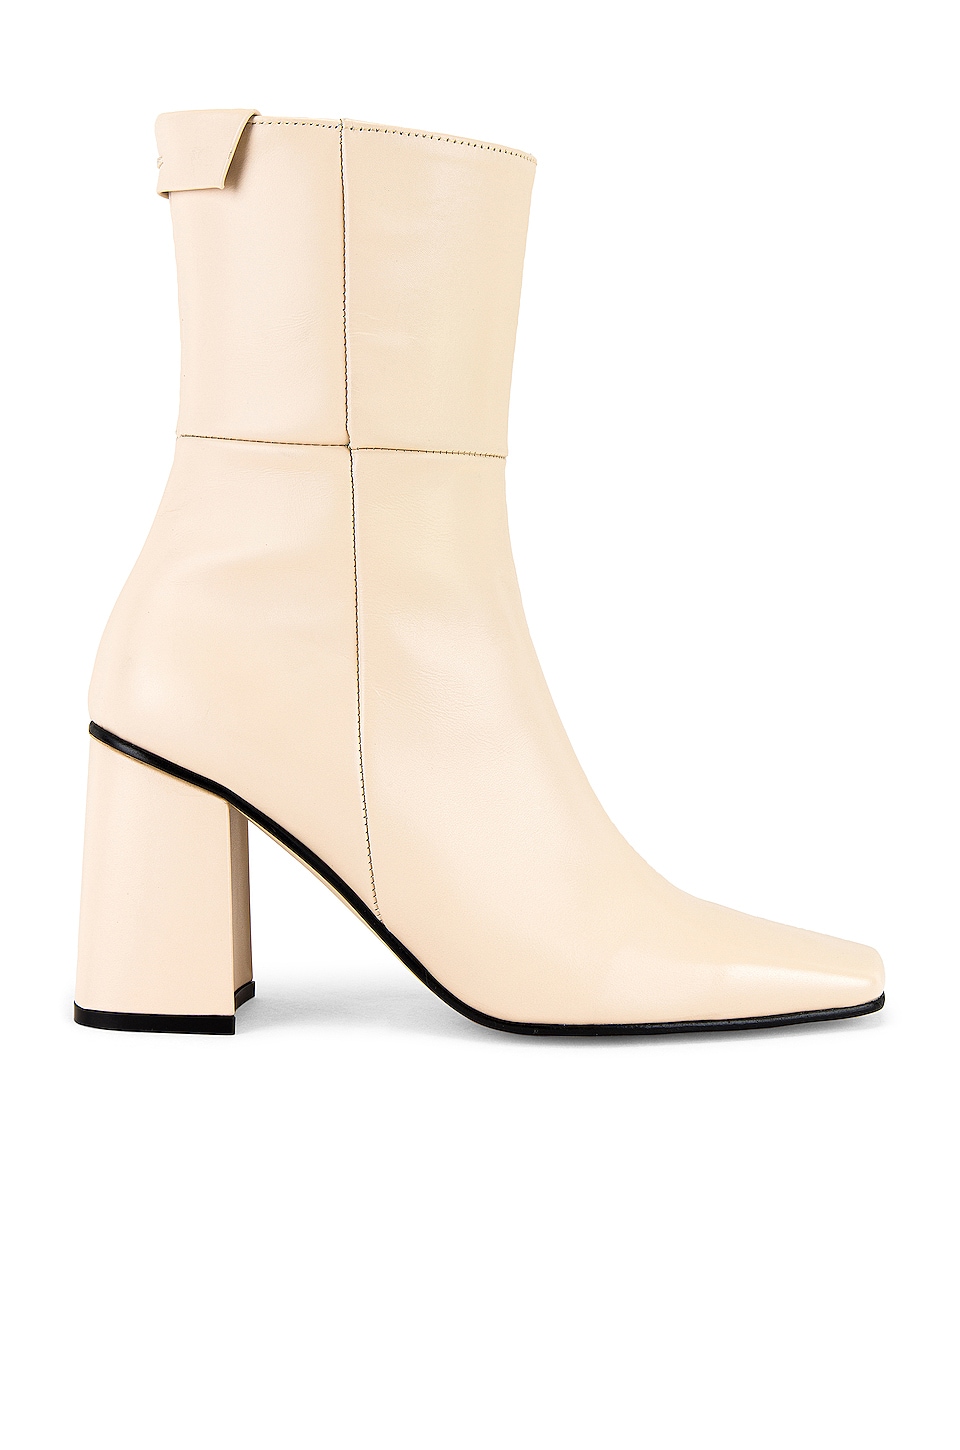 Reike Nen Pointed Square Basic Boots Cream